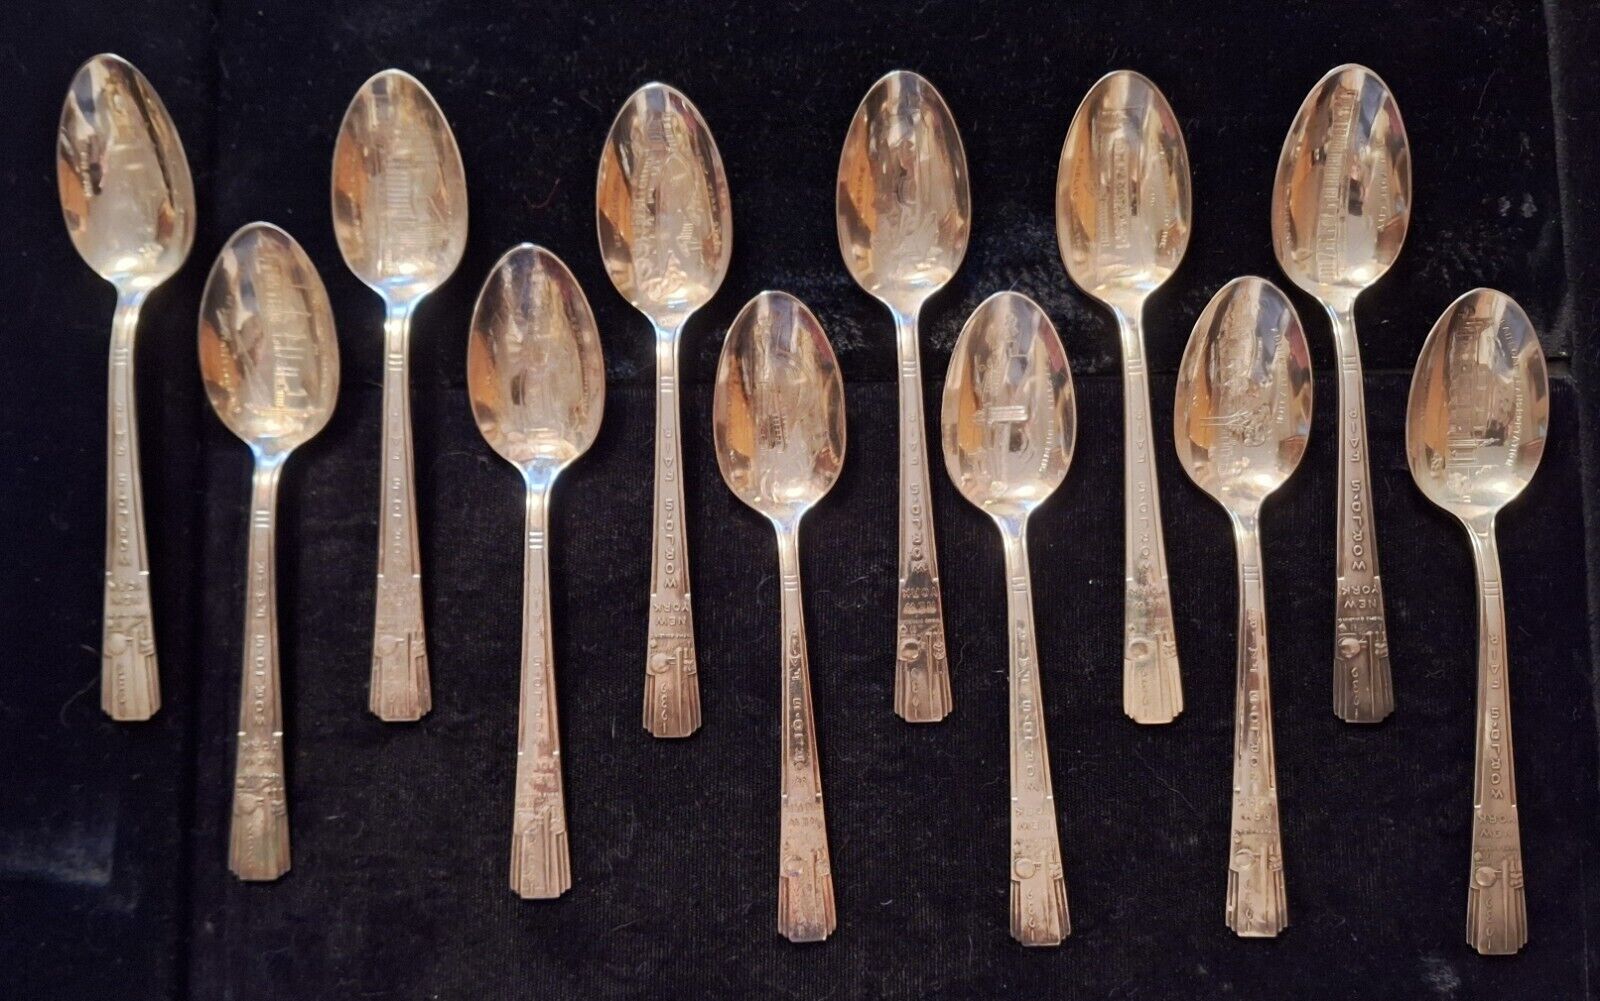 Rare 1939 NEW YORK WORLDS FAIR SPOONS Wm. Rogers *Complete Set of 12 Buildings*